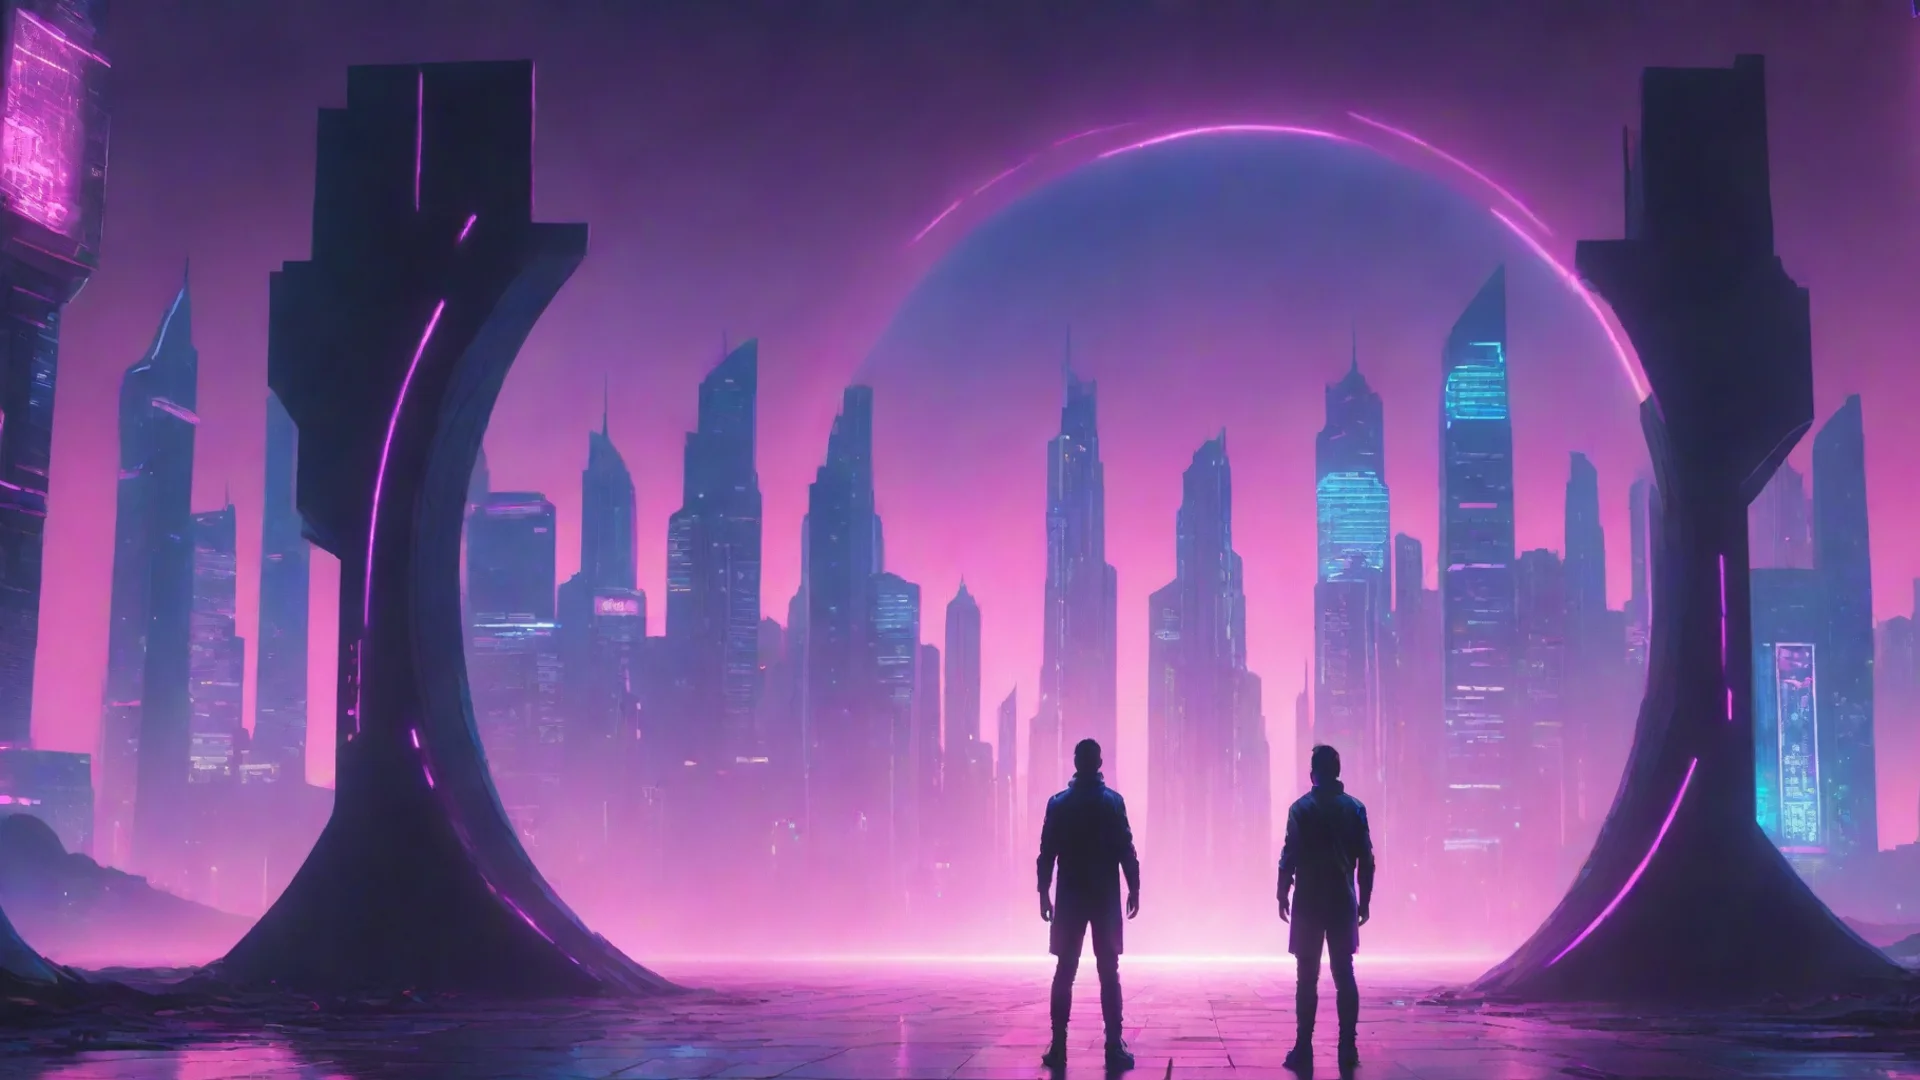 aisynthwave of one man standing behind the portal of the futuristic city wide